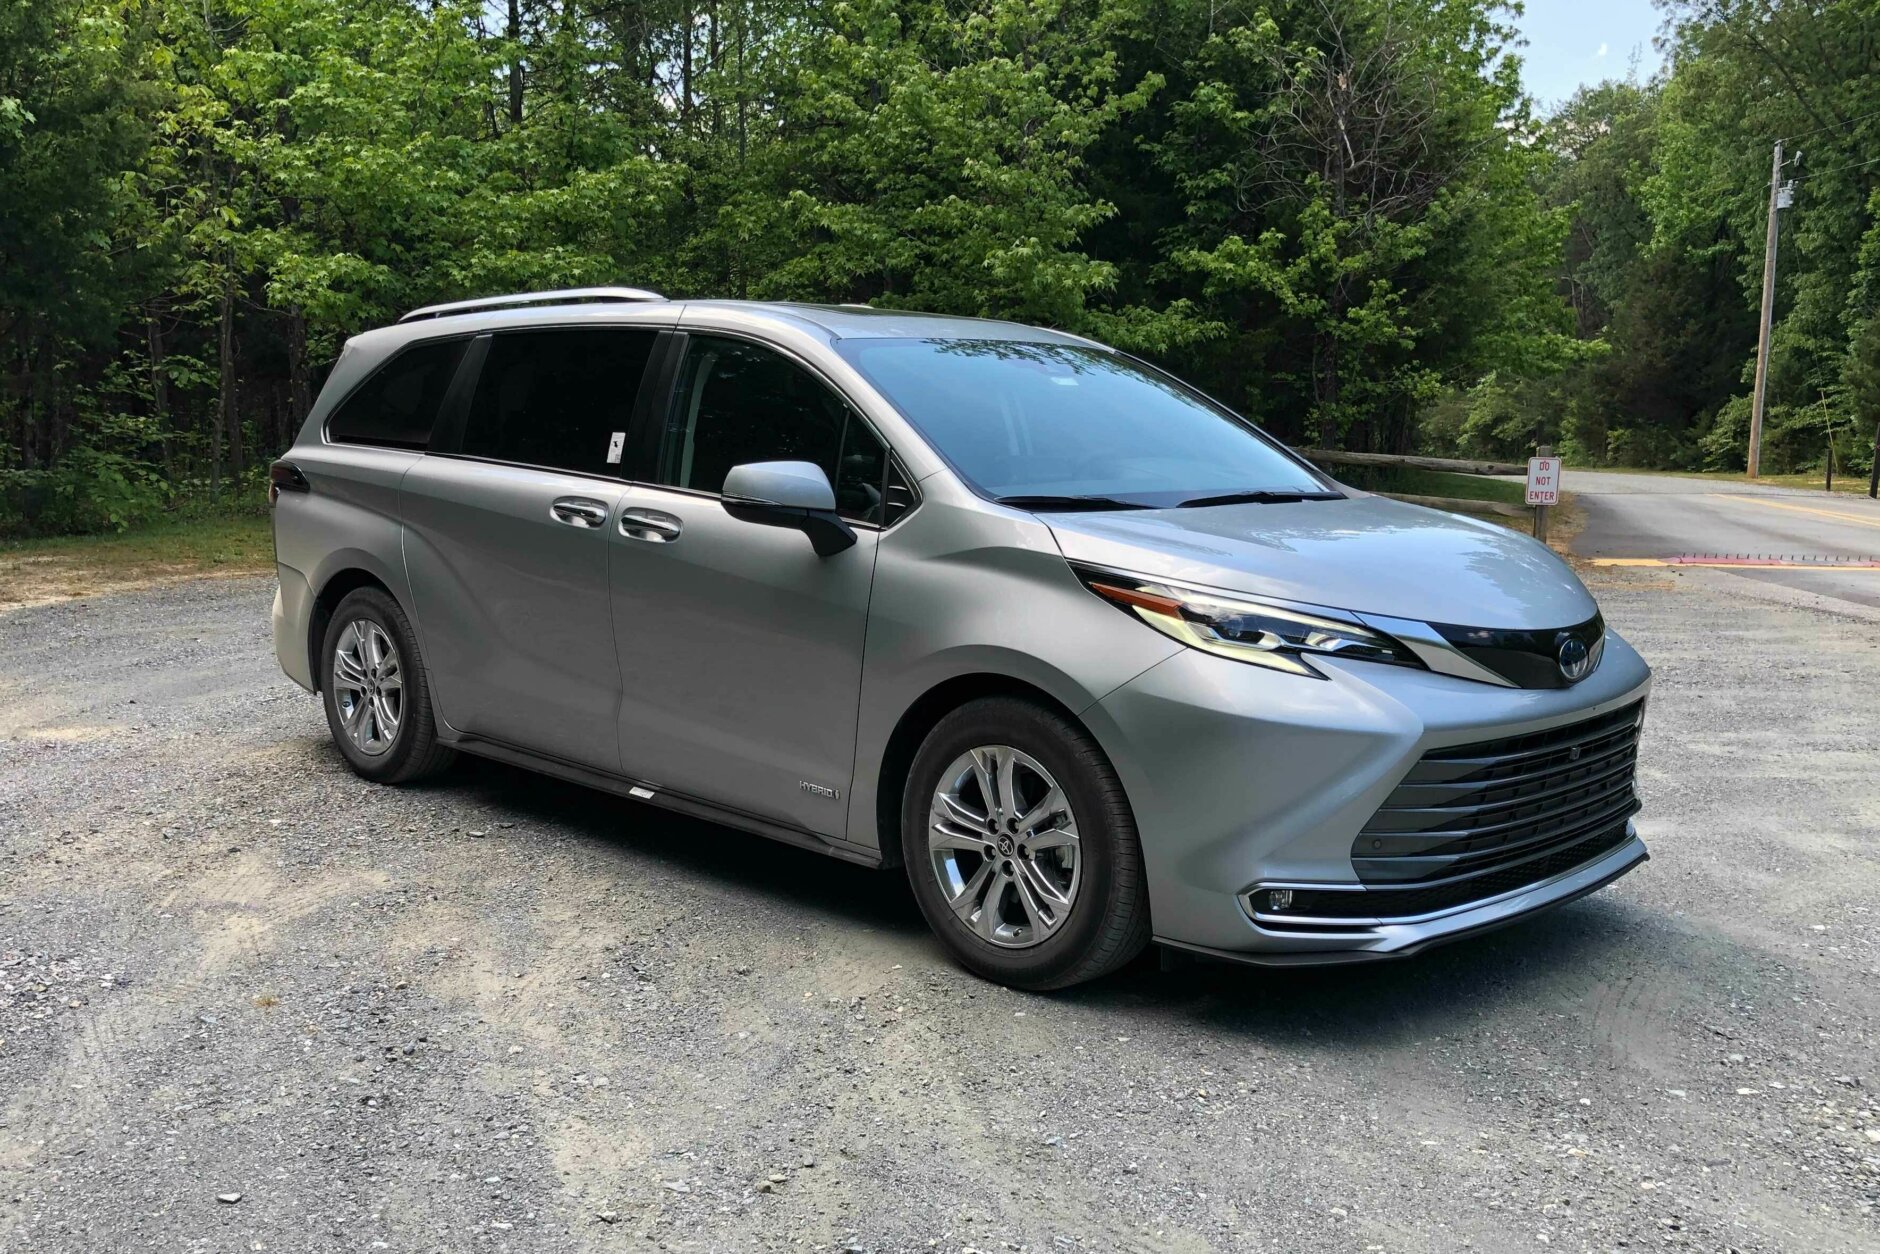 <p><strong>Cost</strong>: $50,460; as tested $53,770<br />
<strong>MPG</strong>: 35 MPG City; 36 MPG Highway (sticker). I managed 37.4 mpg in 387 miles of mixed driving.<br />
<strong>Options</strong>: $1,415 rear seat entertainment system; $300 1500W Inverter; $200 digital rear view mirror; $220 carpeted floor mats,<br />
<strong>Safety</strong>: Toyota Safety Sense 2.0; pre-collision system with pedestrian detection; full-speed range dynamic radar cruise control; lane departure alert with steering with steering assist; lane tracking assist; blind spot monitor with rear cross traffic alert; downhill assist control; bird’s eye view camera with perimeter scan; head up display<br />
<strong>Things to know</strong>: The Sienna goes the better fuel economy route with hybrid system in 2021. It still has plenty of room for the family and an updated look.</p>
<p><strong>Pros</strong>:</p>
<ul>
<li>Easy on gas thanks to the Toyota hybrid system</li>
<li>Plenty of space for the family to spread out</li>
<li>Improved tech and the ability you integrate your phone</li>
</ul>
<p><strong>Cons</strong>:</p>
<ul>
<li>Hybrid power lacks when compared to the V6 from before</li>
<li>The second row of captain’s chairs limits space for storage</li>
<li>The brakes feel different especially for drivers coming from a non-hybrid vehicle</li>
</ul>
